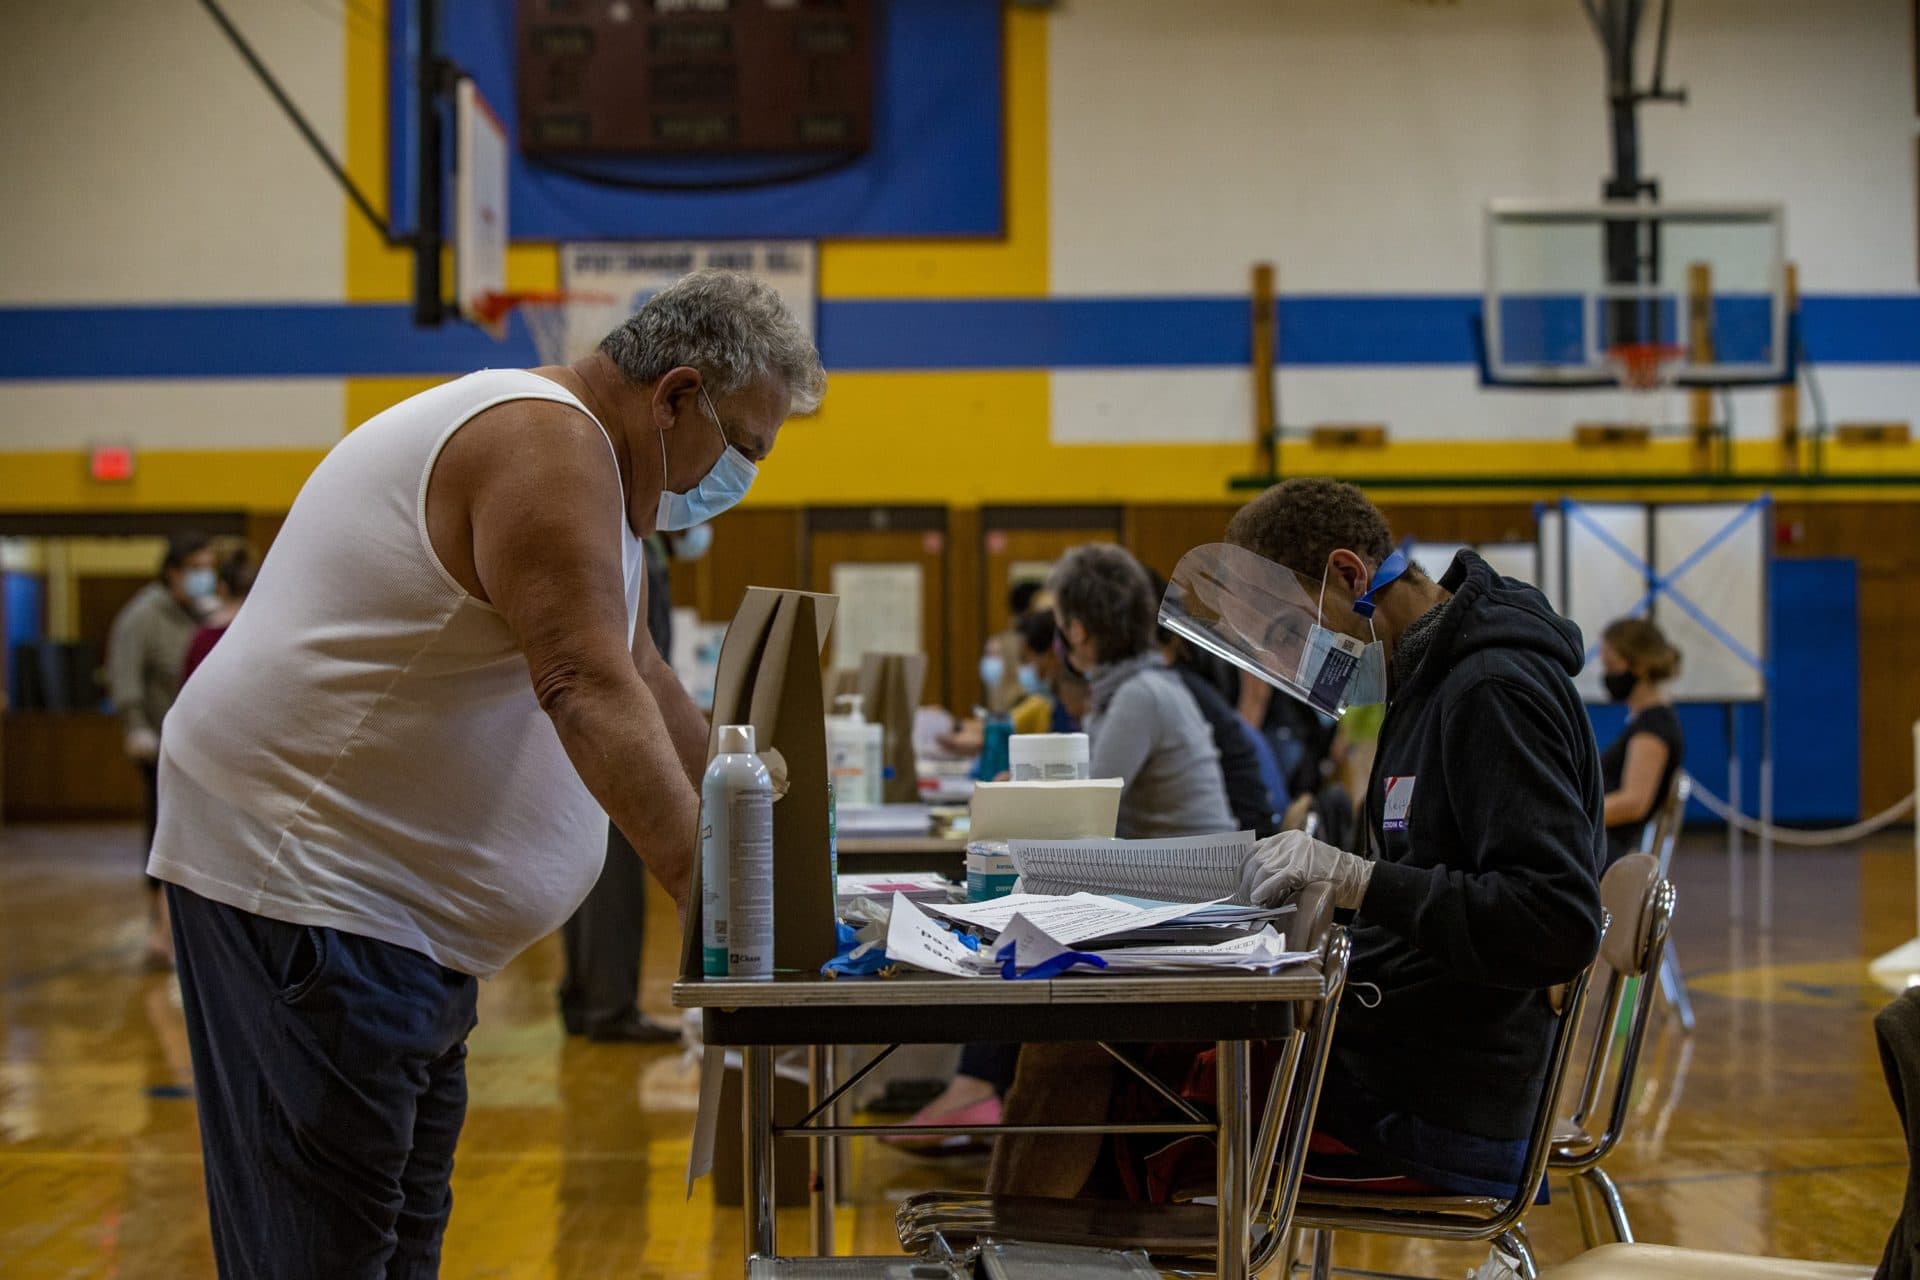 A voter checks in to receive his ballot at the Ward 1 polling station at East Boston High School as election day begins. (Jesse Costa/WBUR)